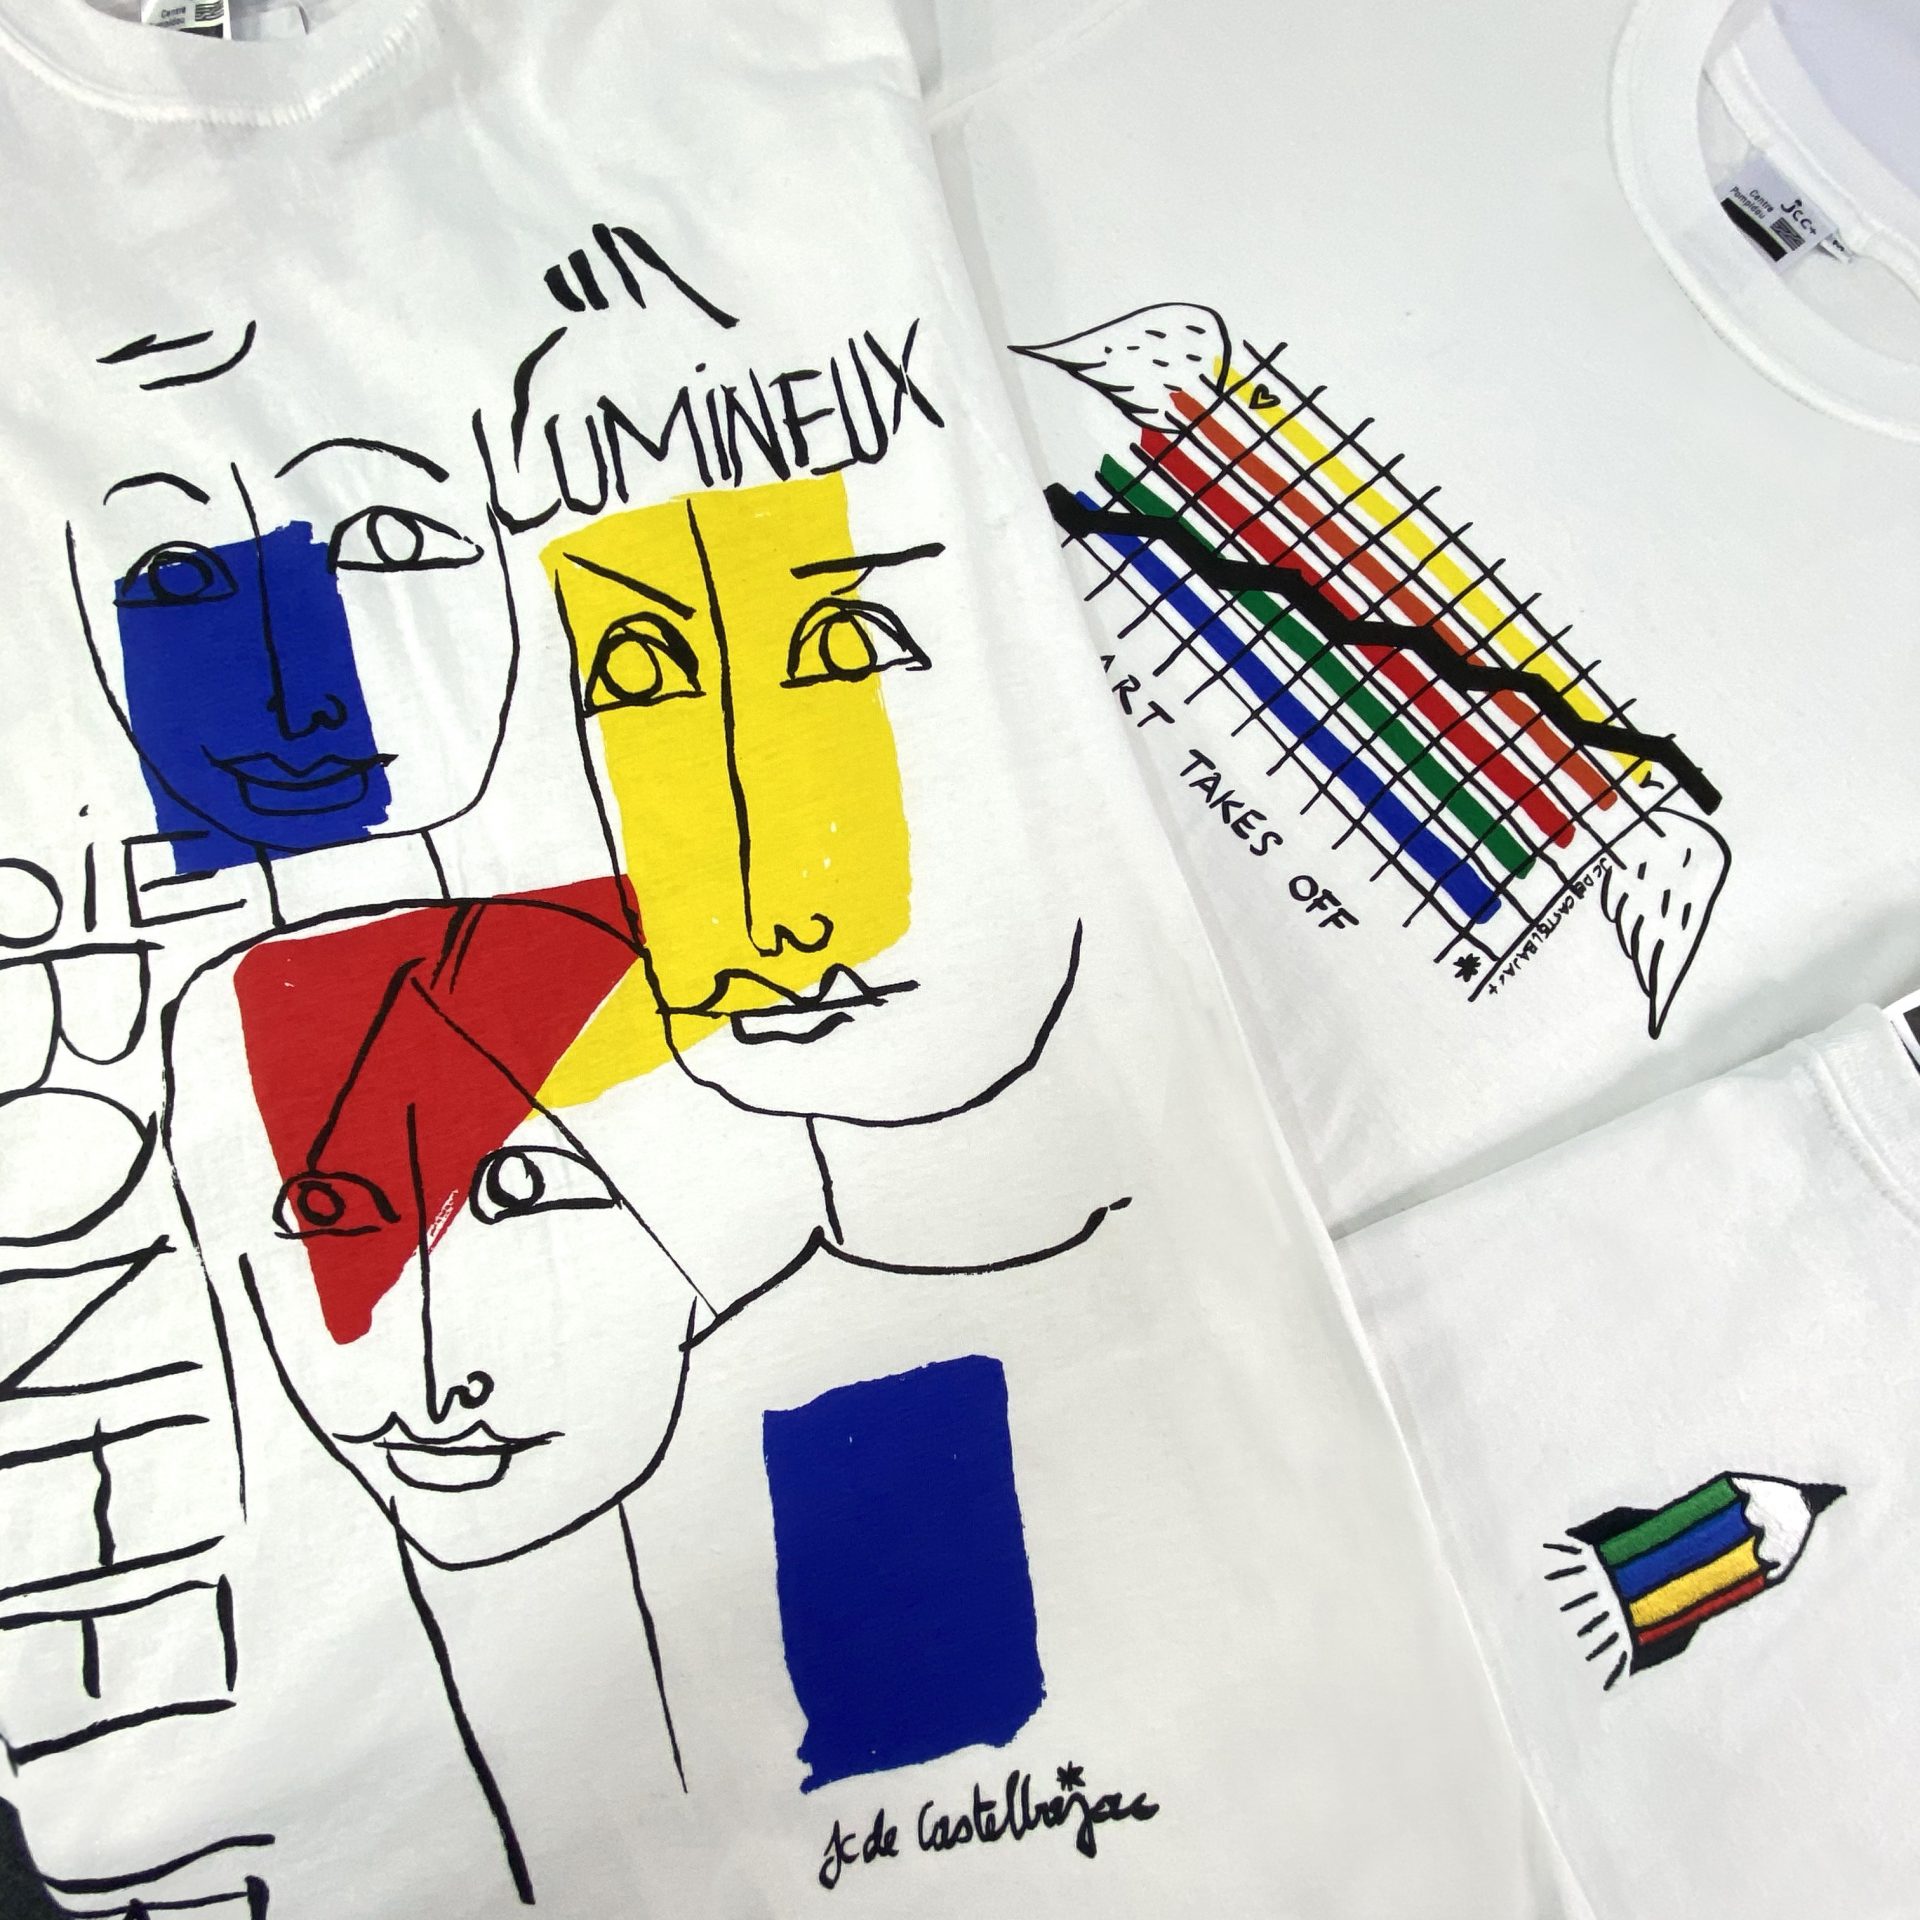 Full Centre Pompidou collection of t-shirts by Jean-Charles de Castelbajac